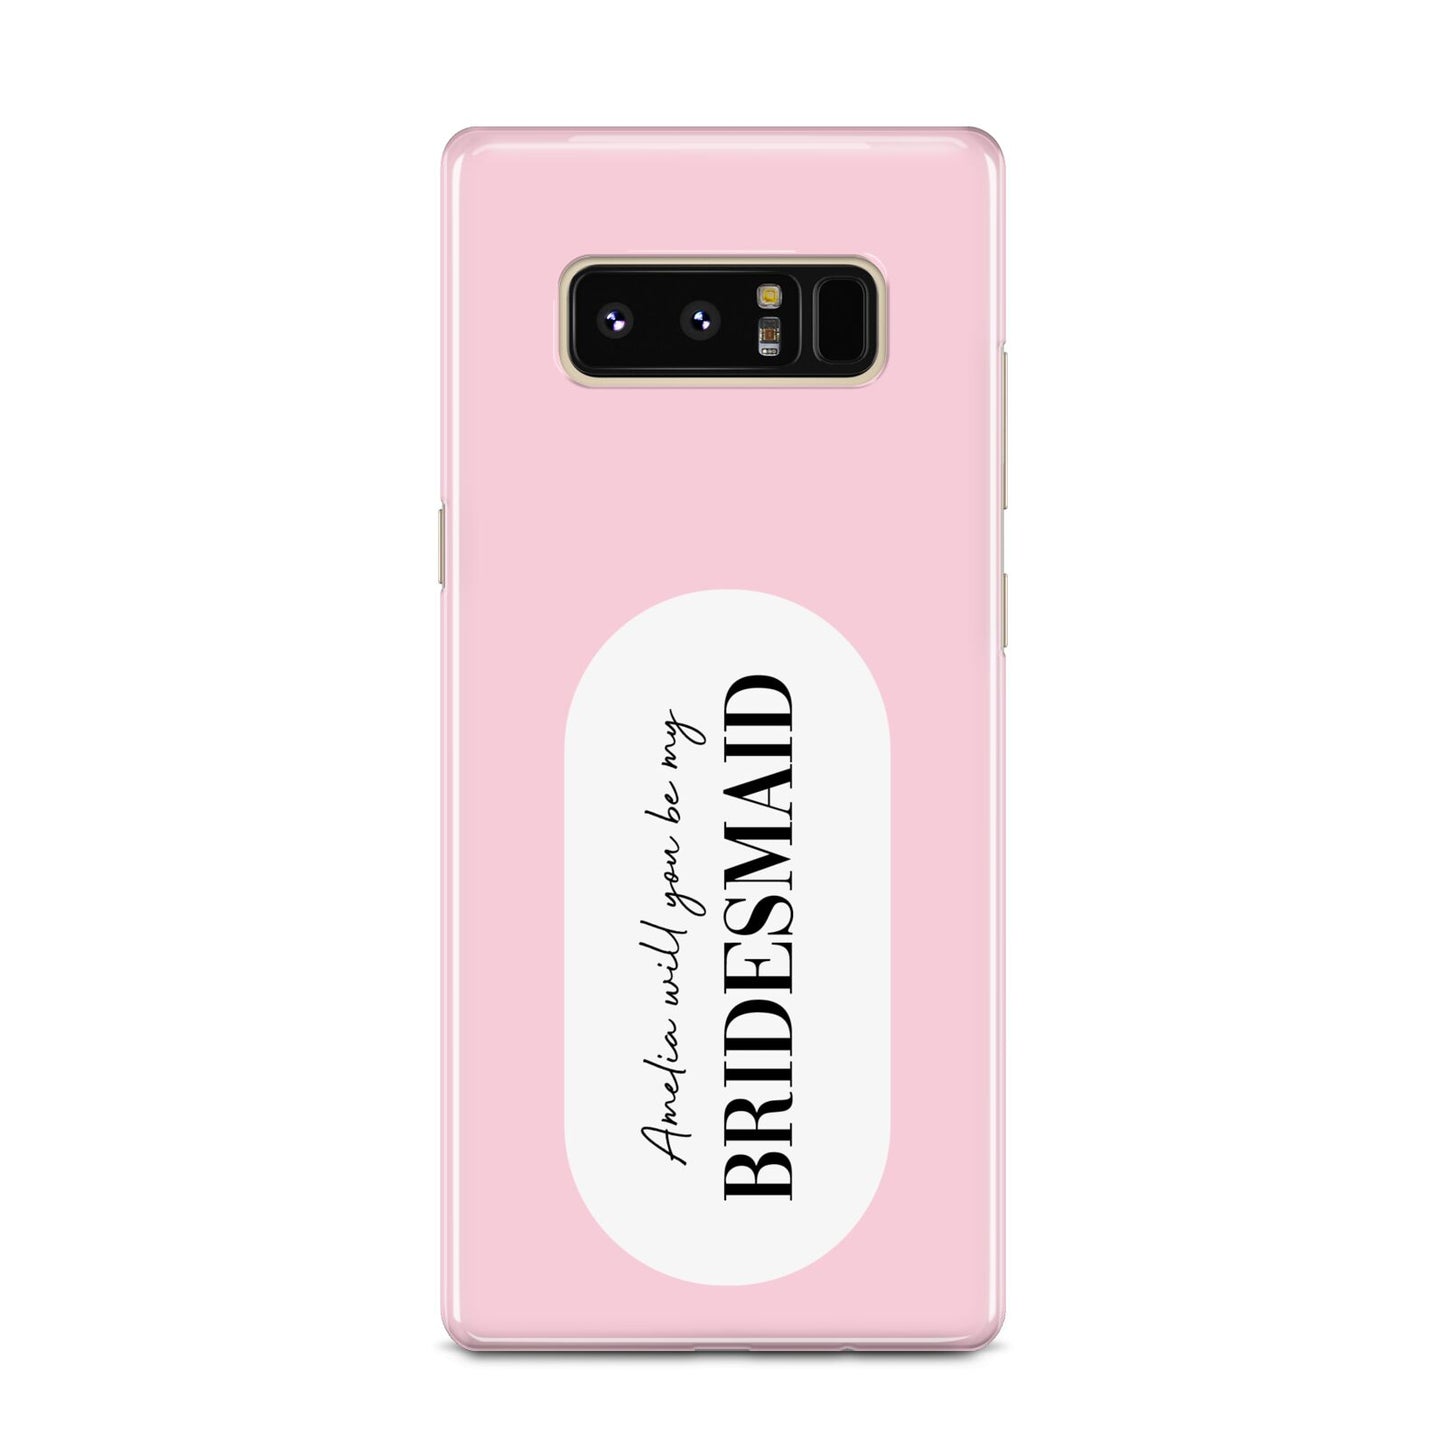 Will You Be My Bridesmaid Samsung Galaxy Note 8 Case